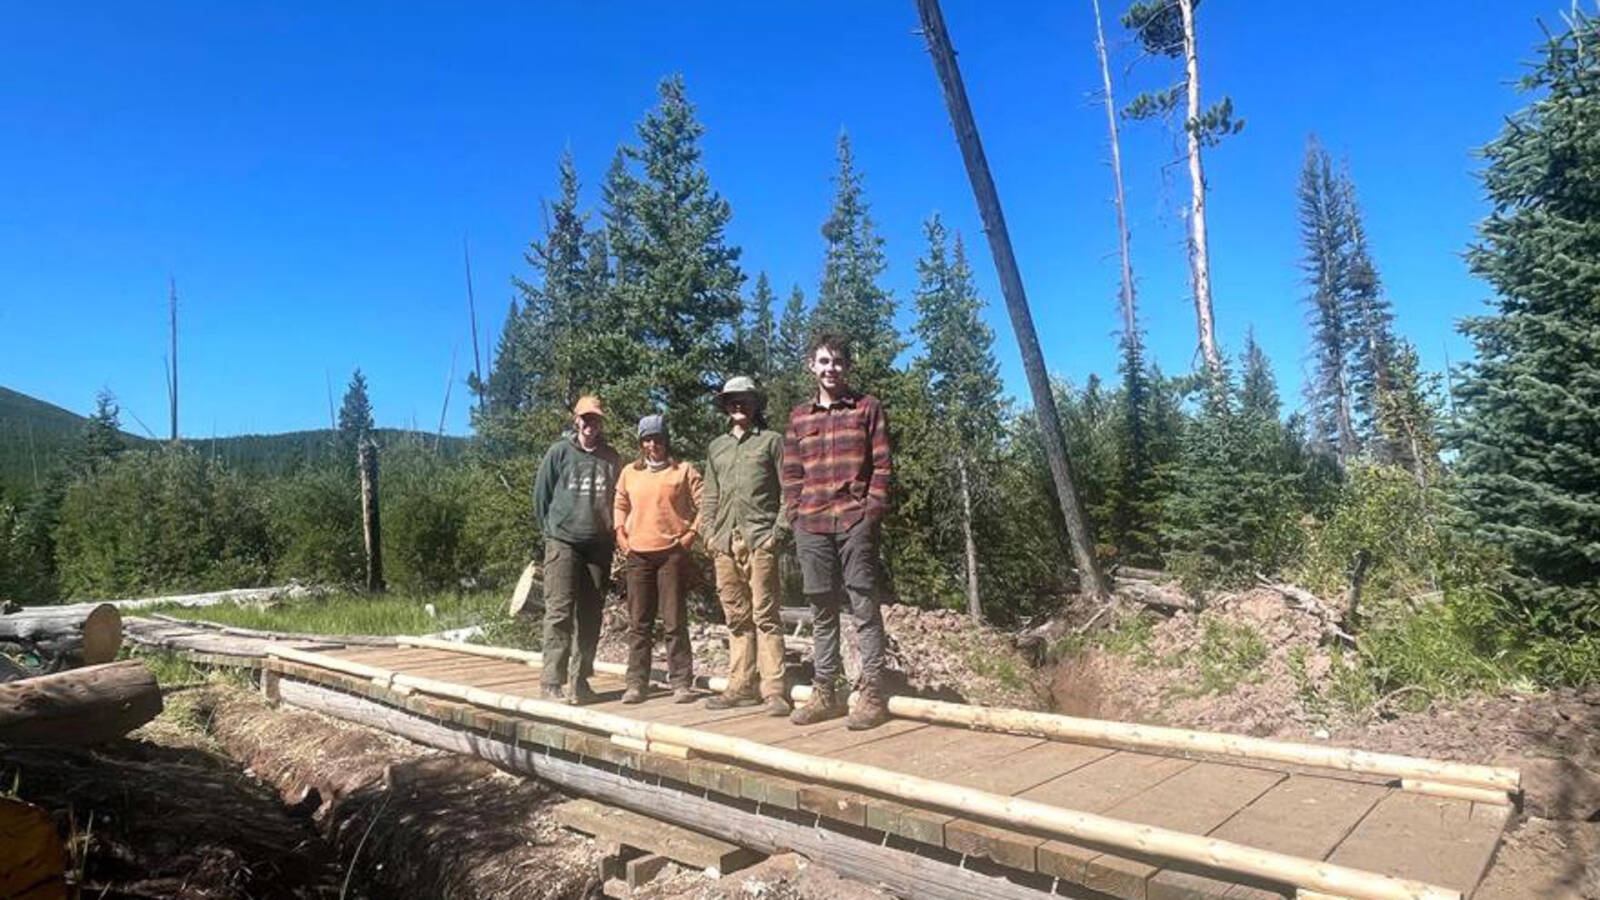 <p>Trail maintenance along the Landers Fork Trail connecting the Bob Marshall Wilderness Complex and adjacent lands to the Continental Divide National Scenic Trail in Montana. Repairs removed vegetation overgrowth and fixed washed out trails by flooding that impeded access.</p>